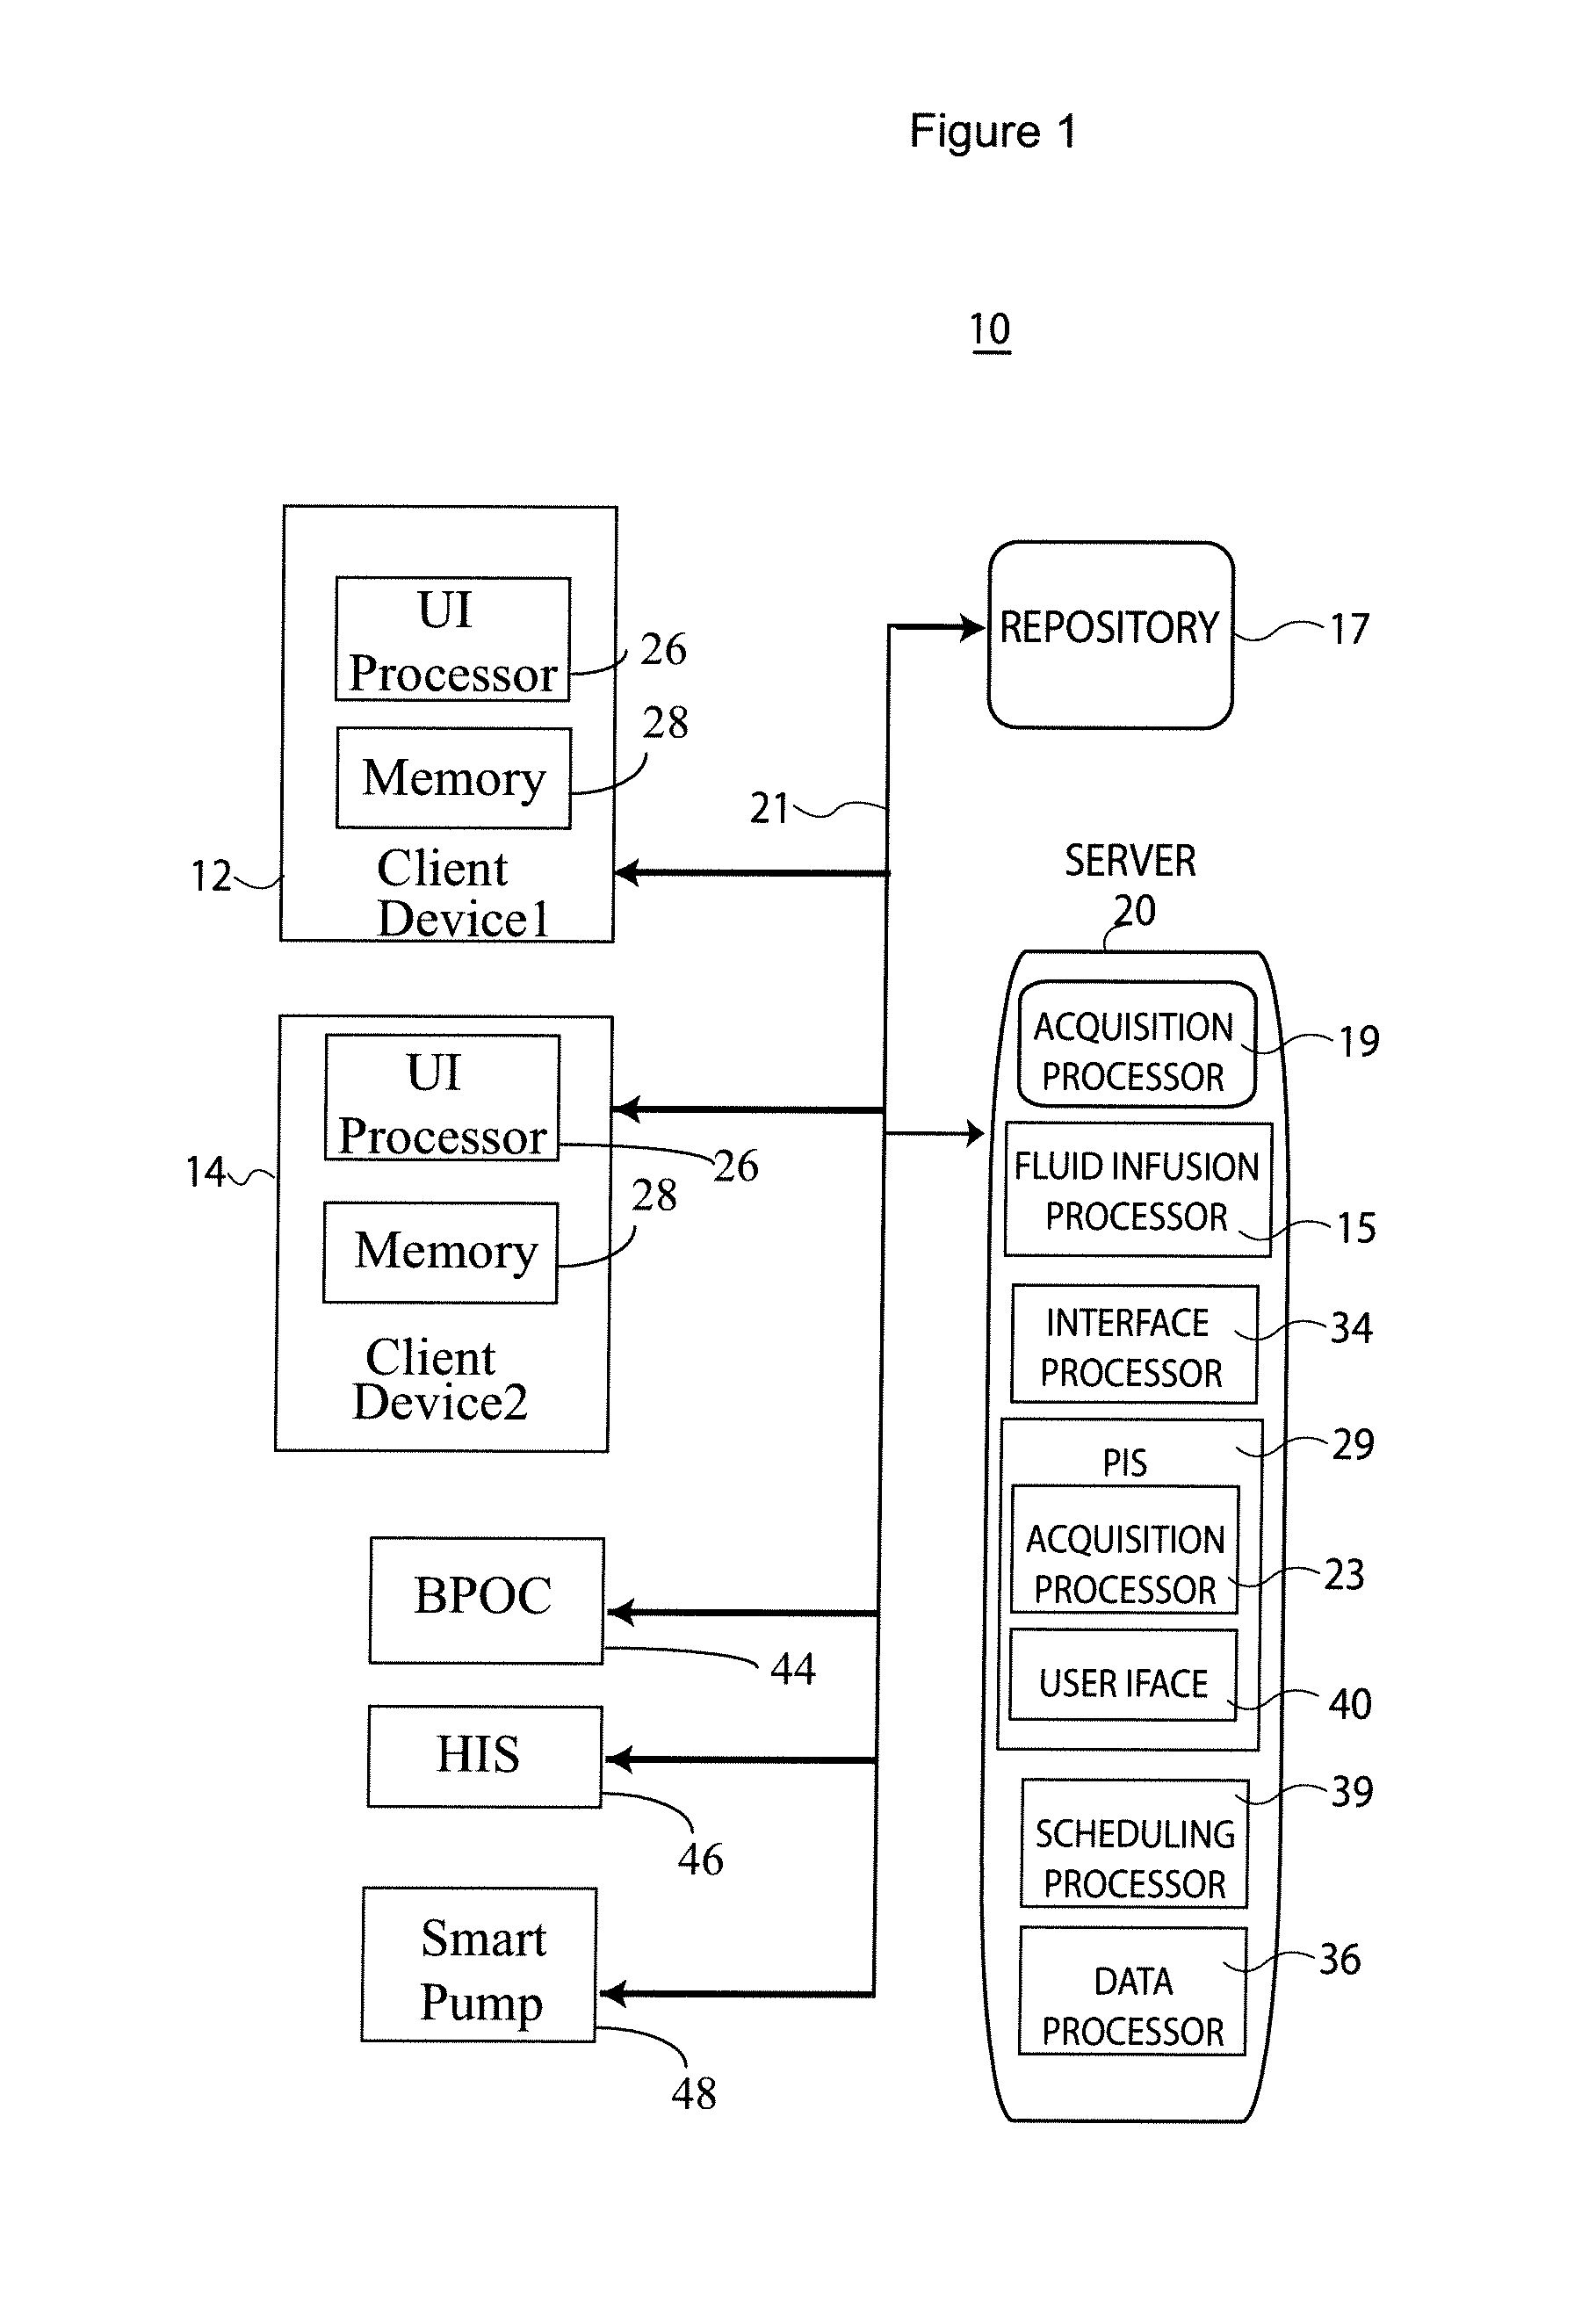 Integrated medication and infusion monitoring system